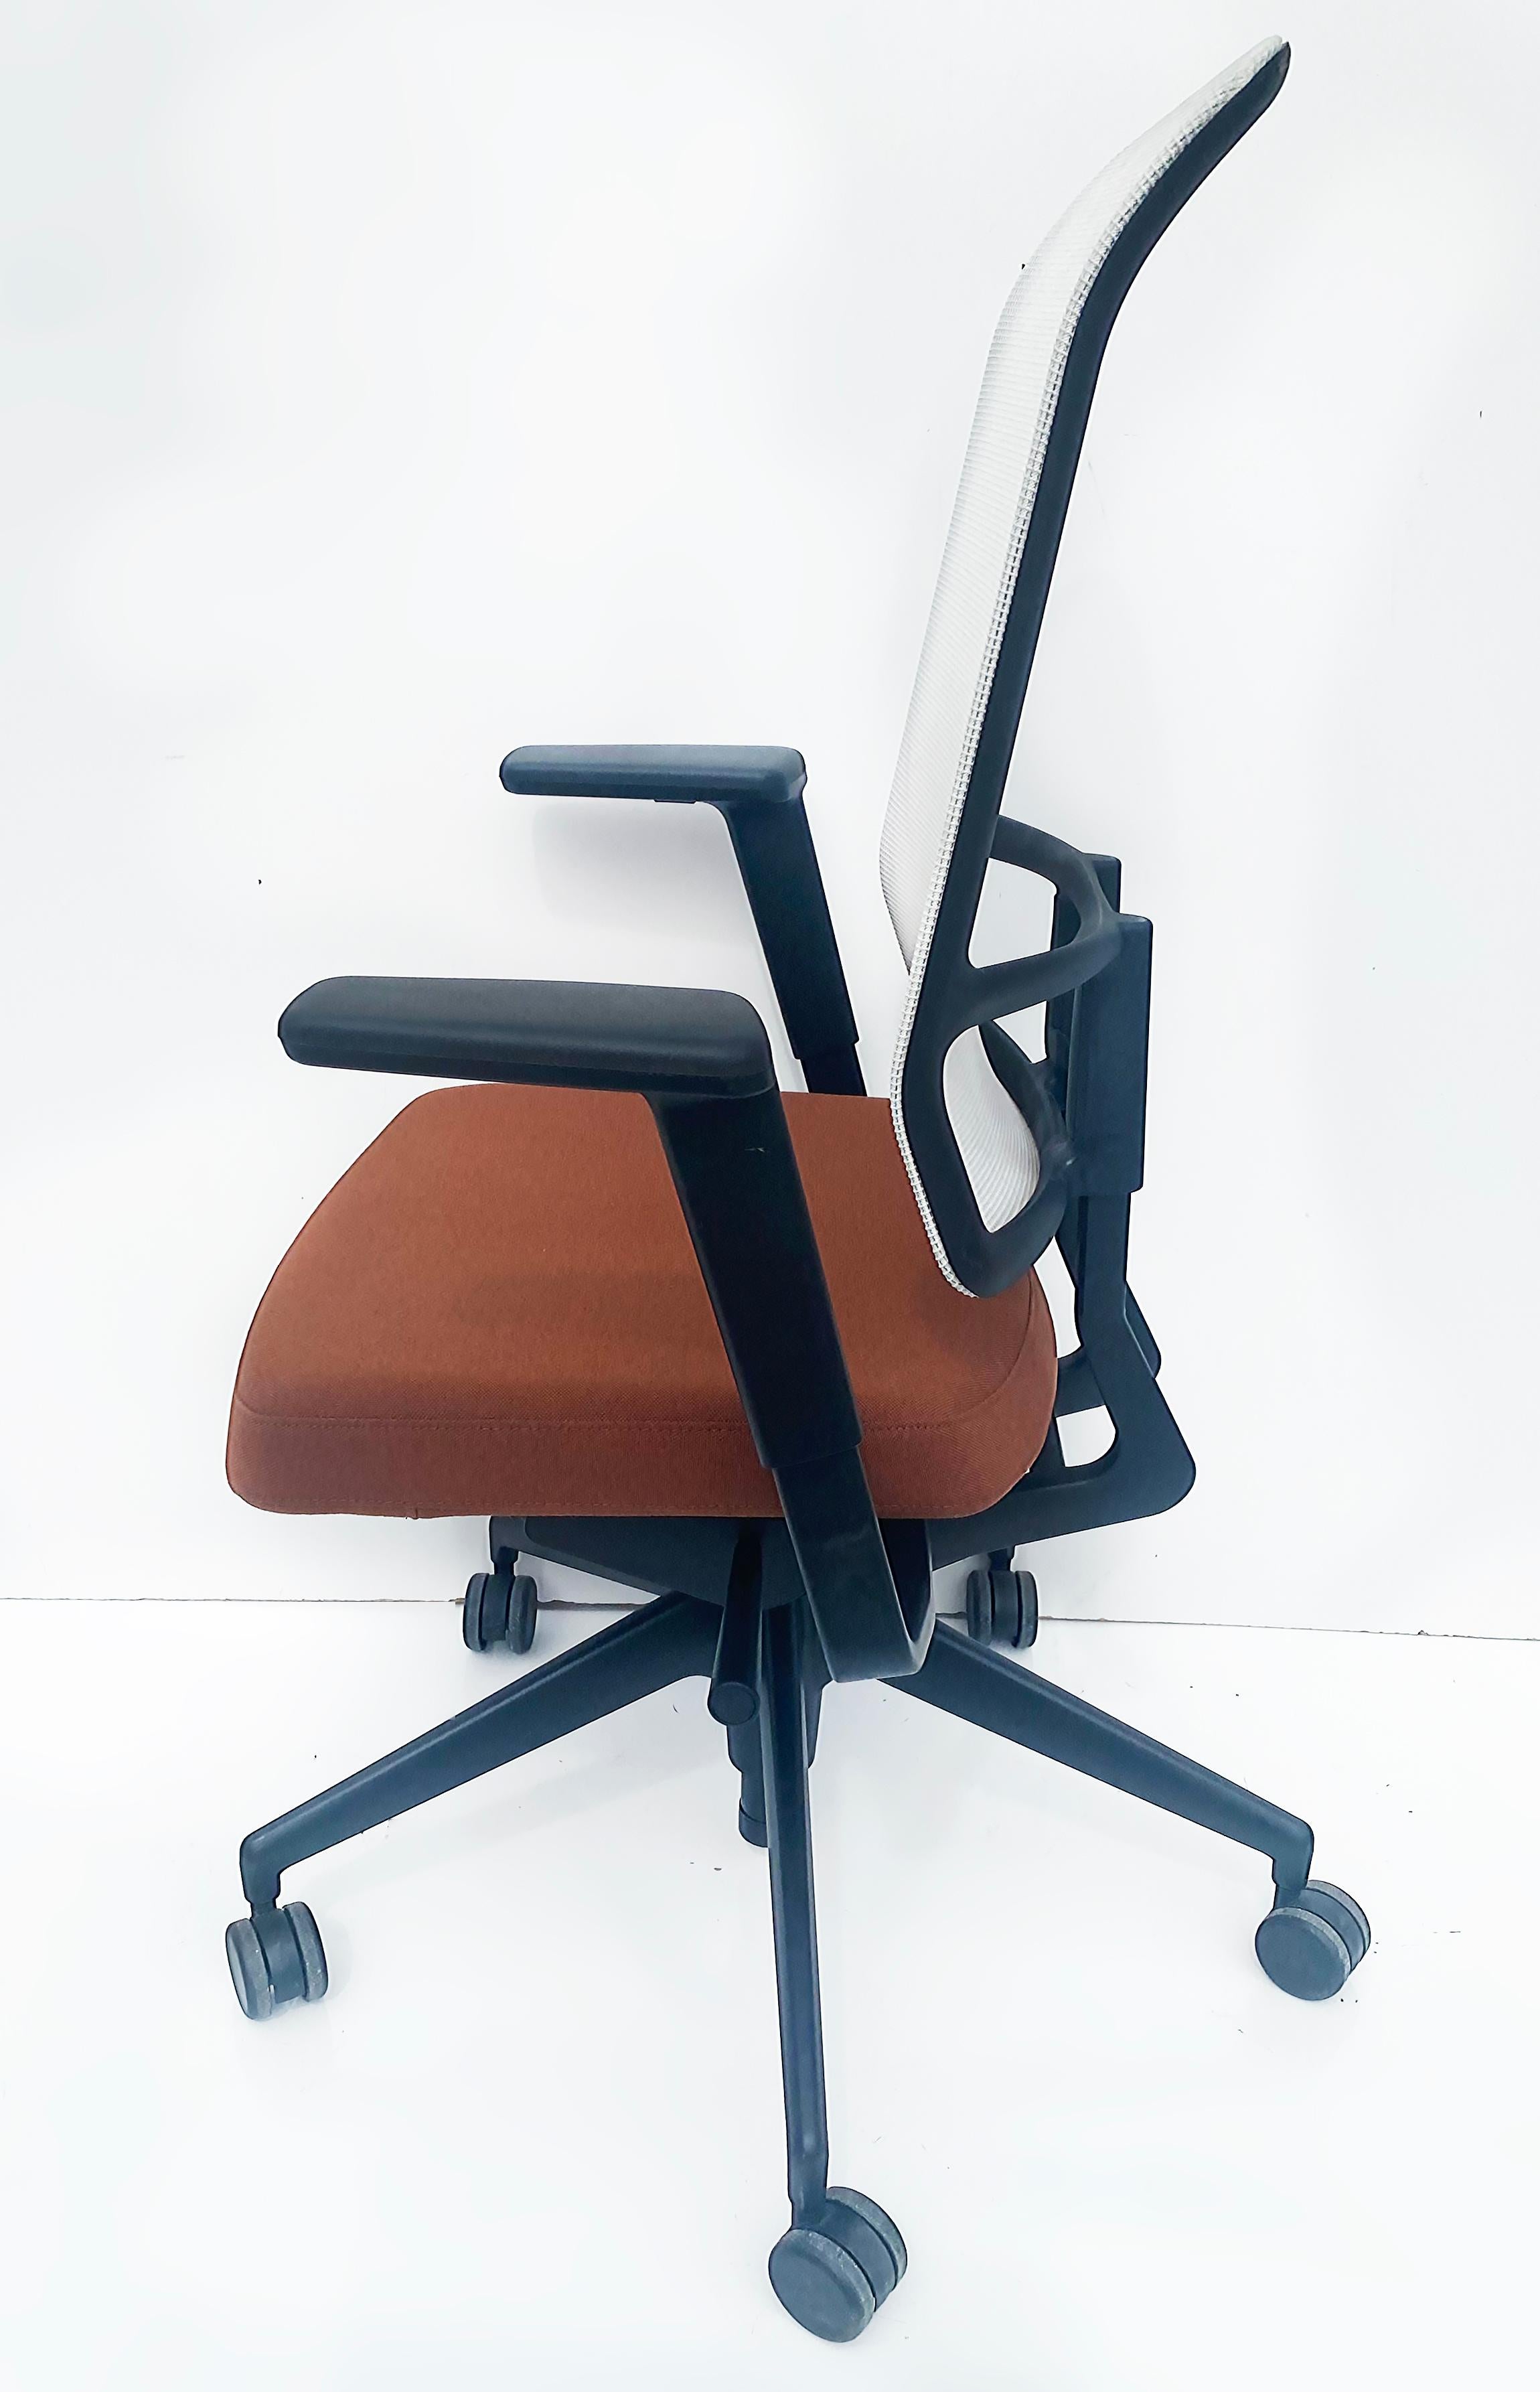 Fabric Vitra AM Fully Adjustable Ergonomic Office Chairs by Alberto Meda 2021 For Sale